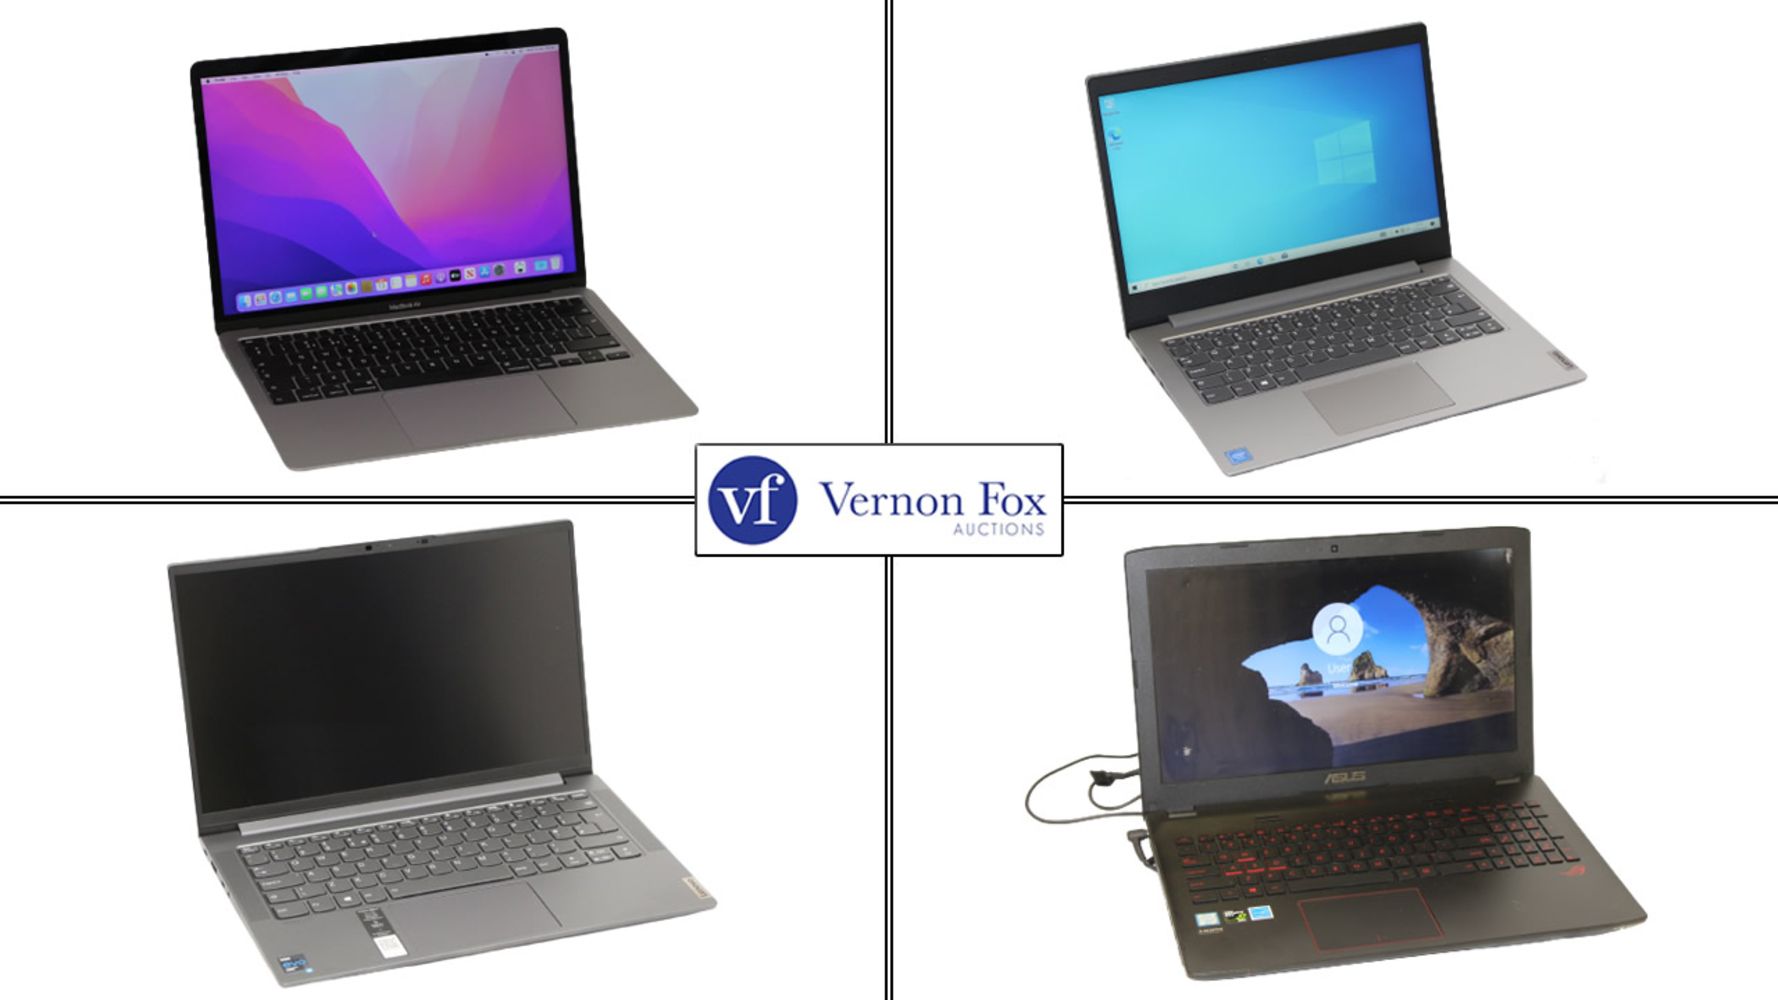 TIMED ONLINE AUCTION: The Laptop Sale. New and Pre-owned Laptops and MacBooks, with FREE UK DELIVERY!